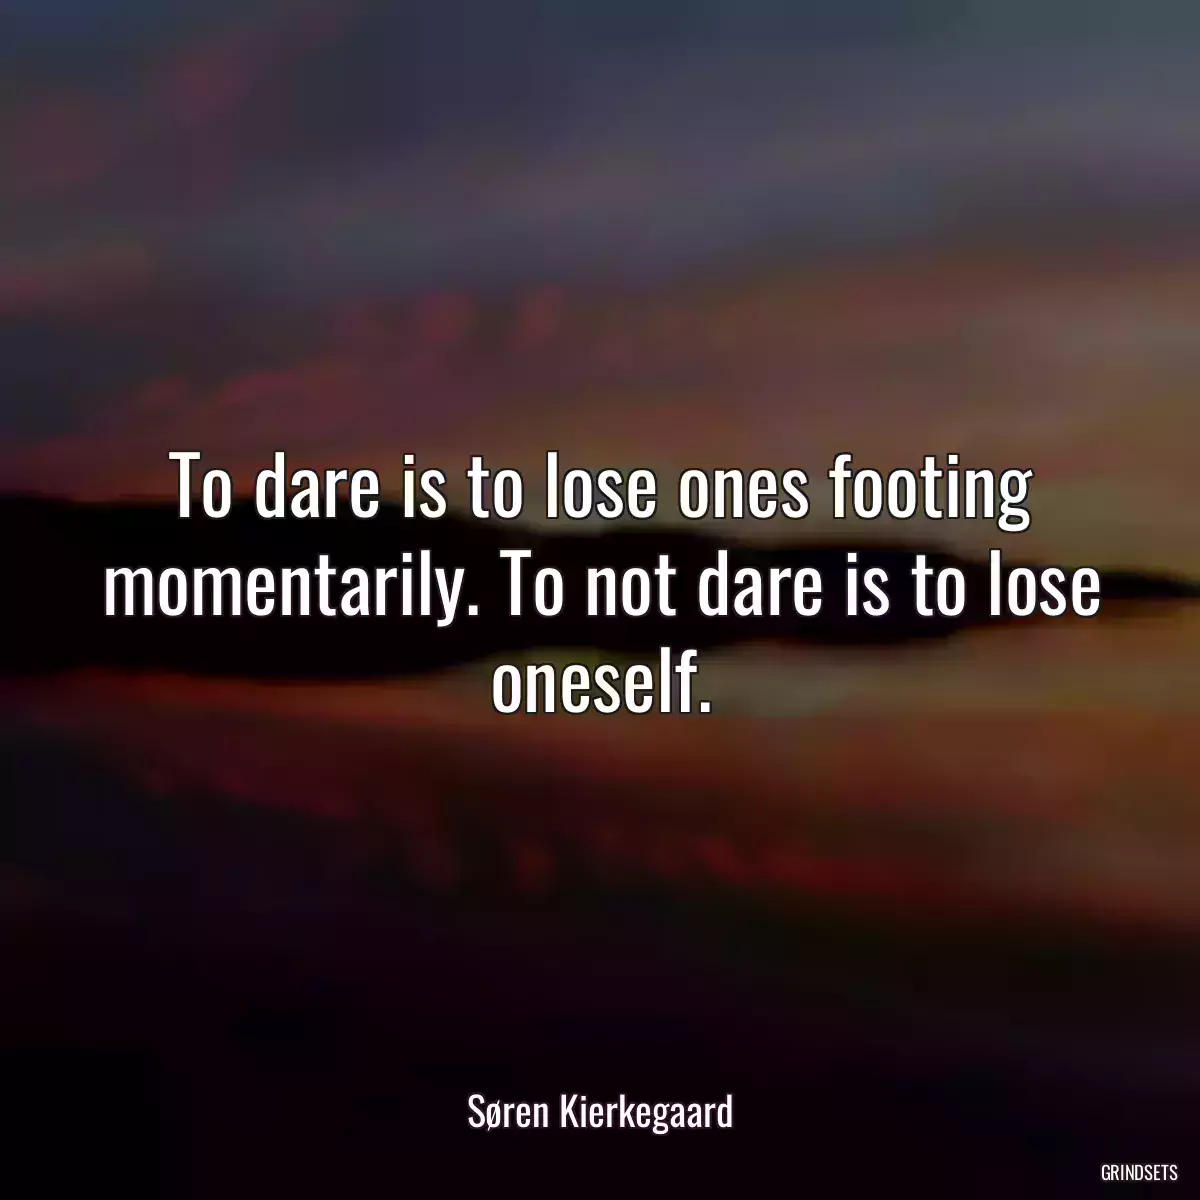 To dare is to lose ones footing momentarily. To not dare is to lose oneself.